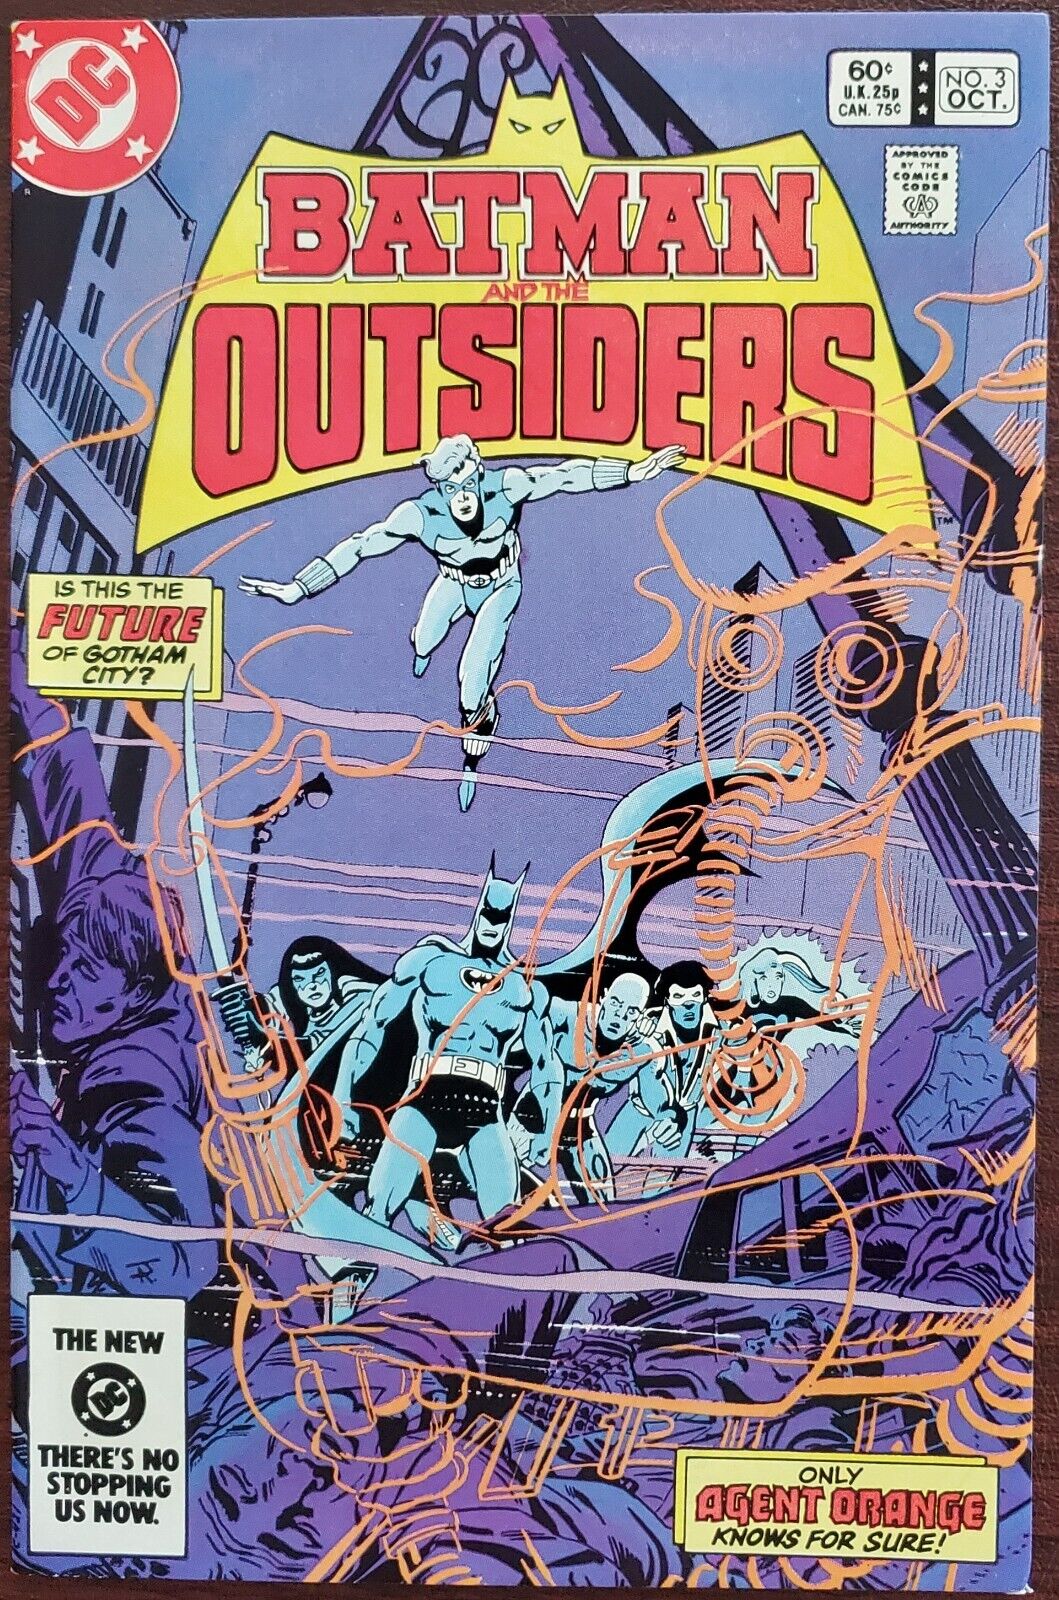 Batman and the Outsiders #3 VF/NM 9.0 (DC 1983)✨